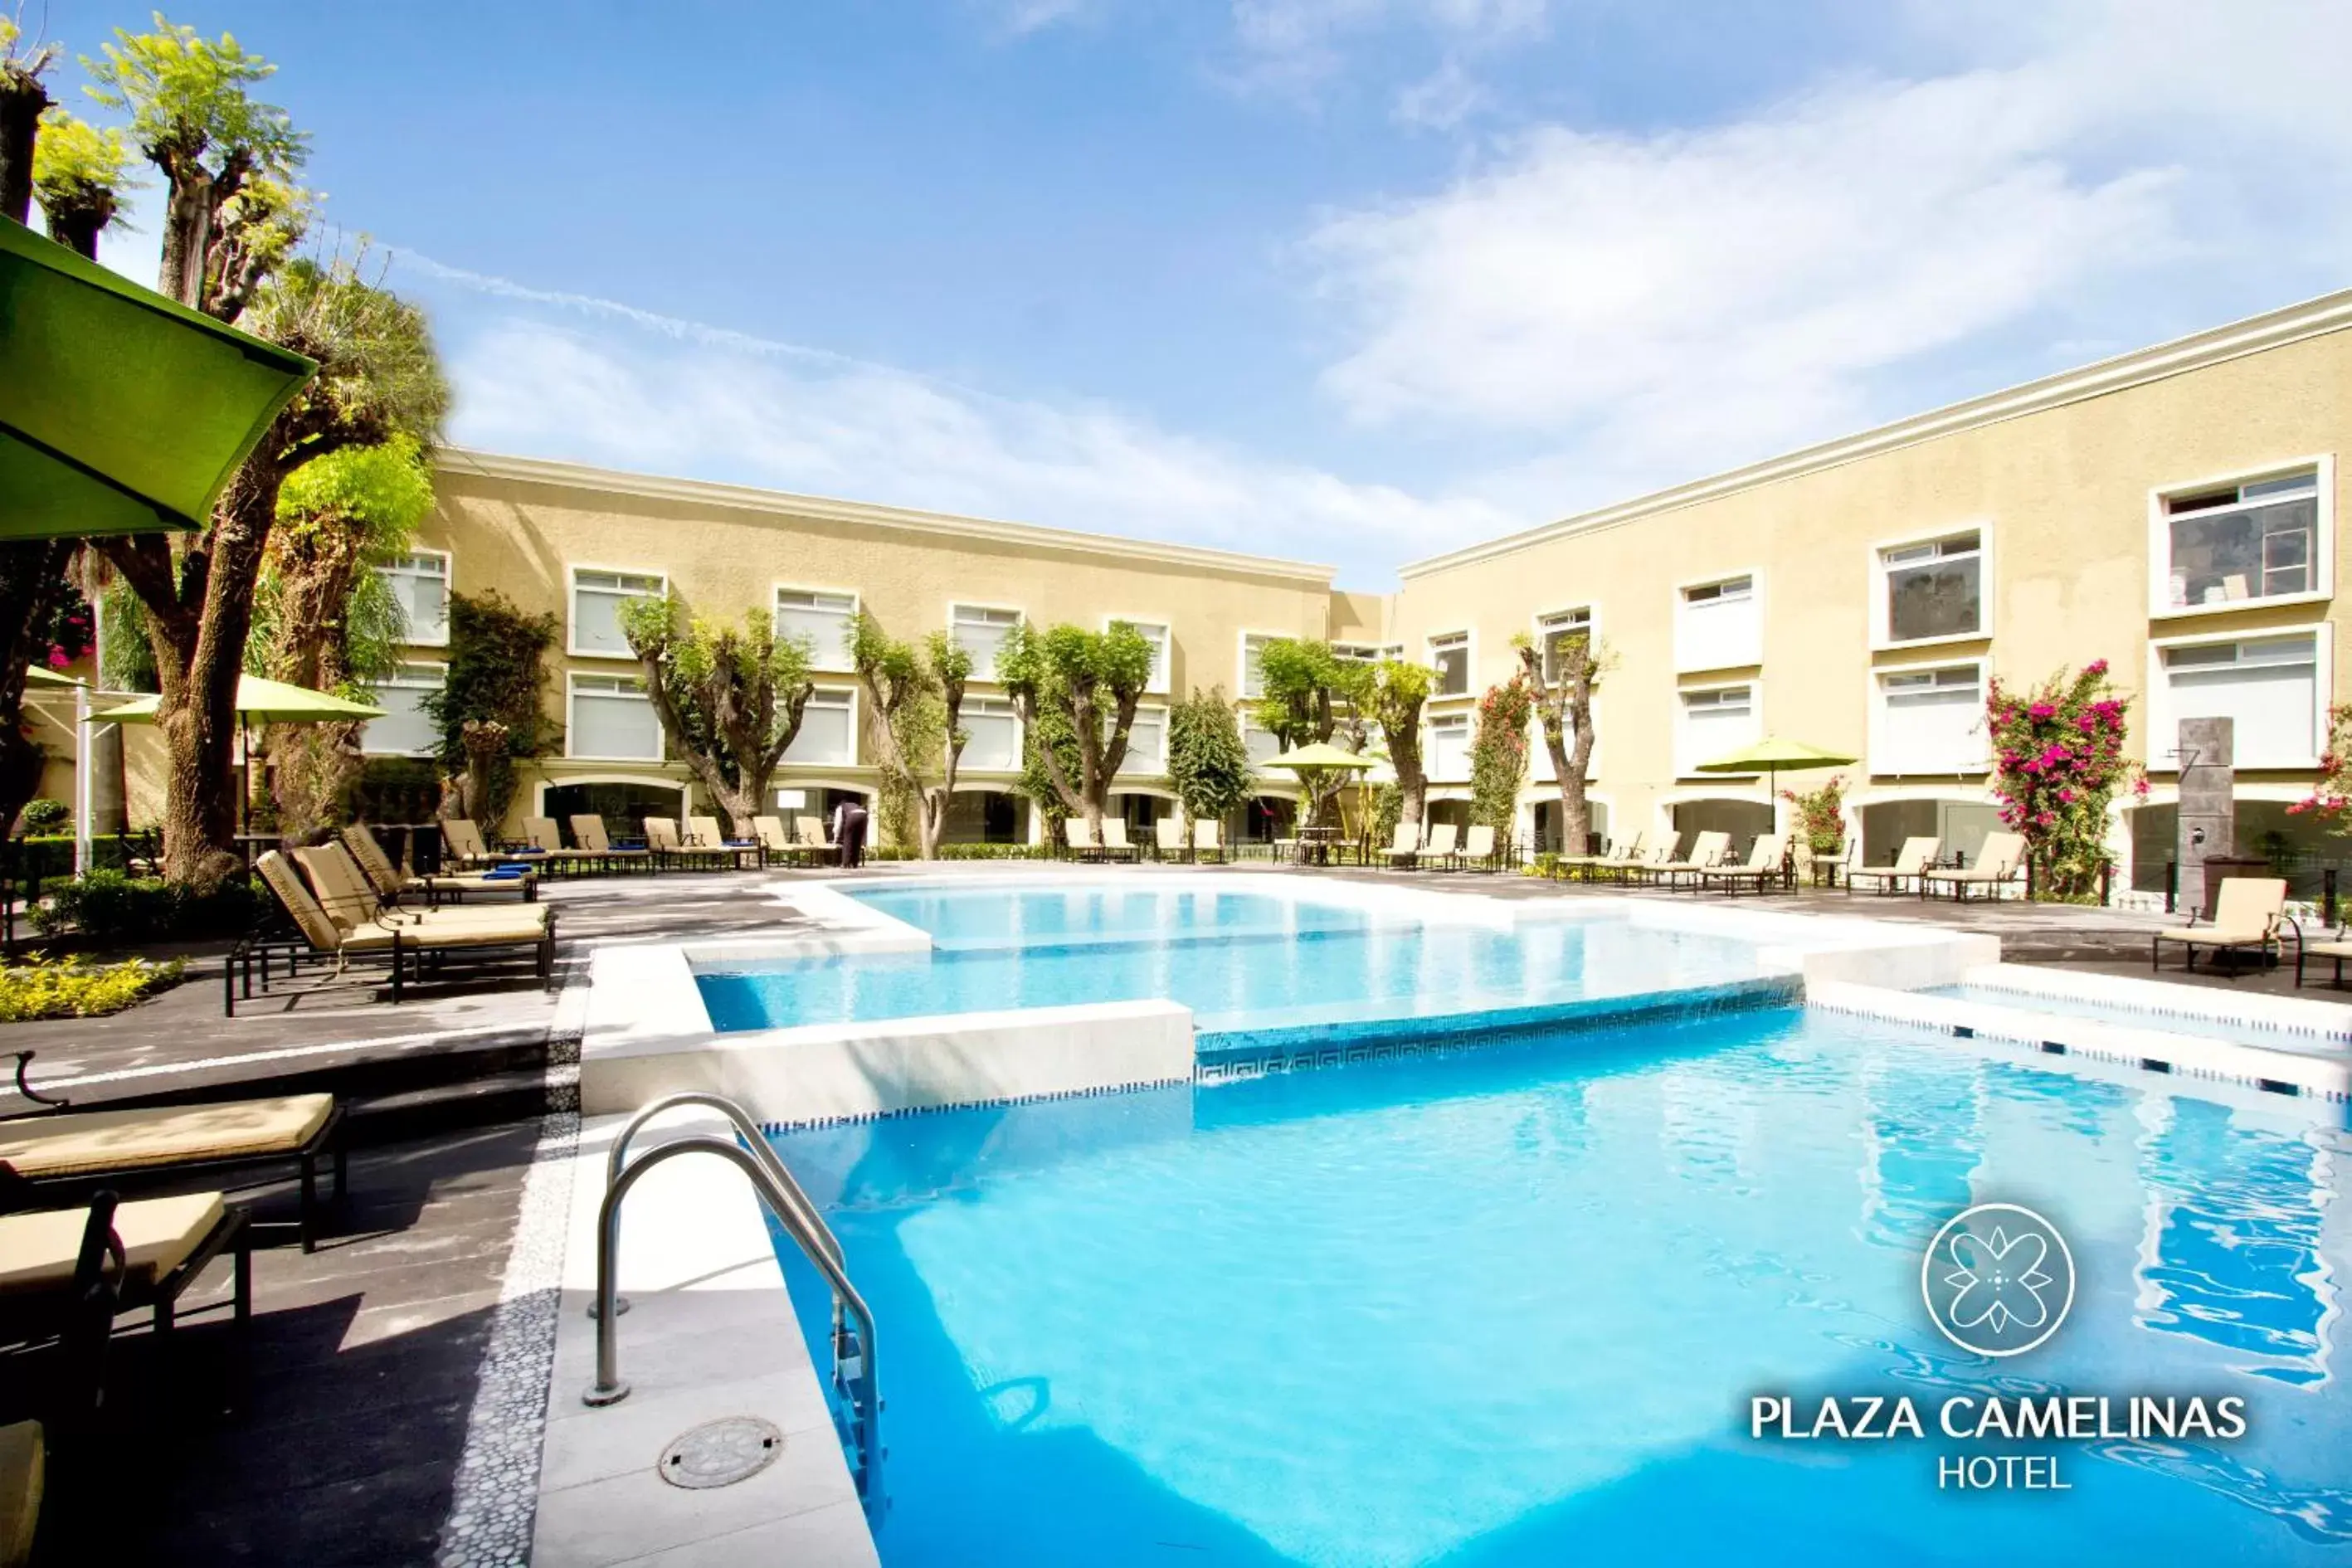 Swimming Pool in Plaza Camelinas Hotel